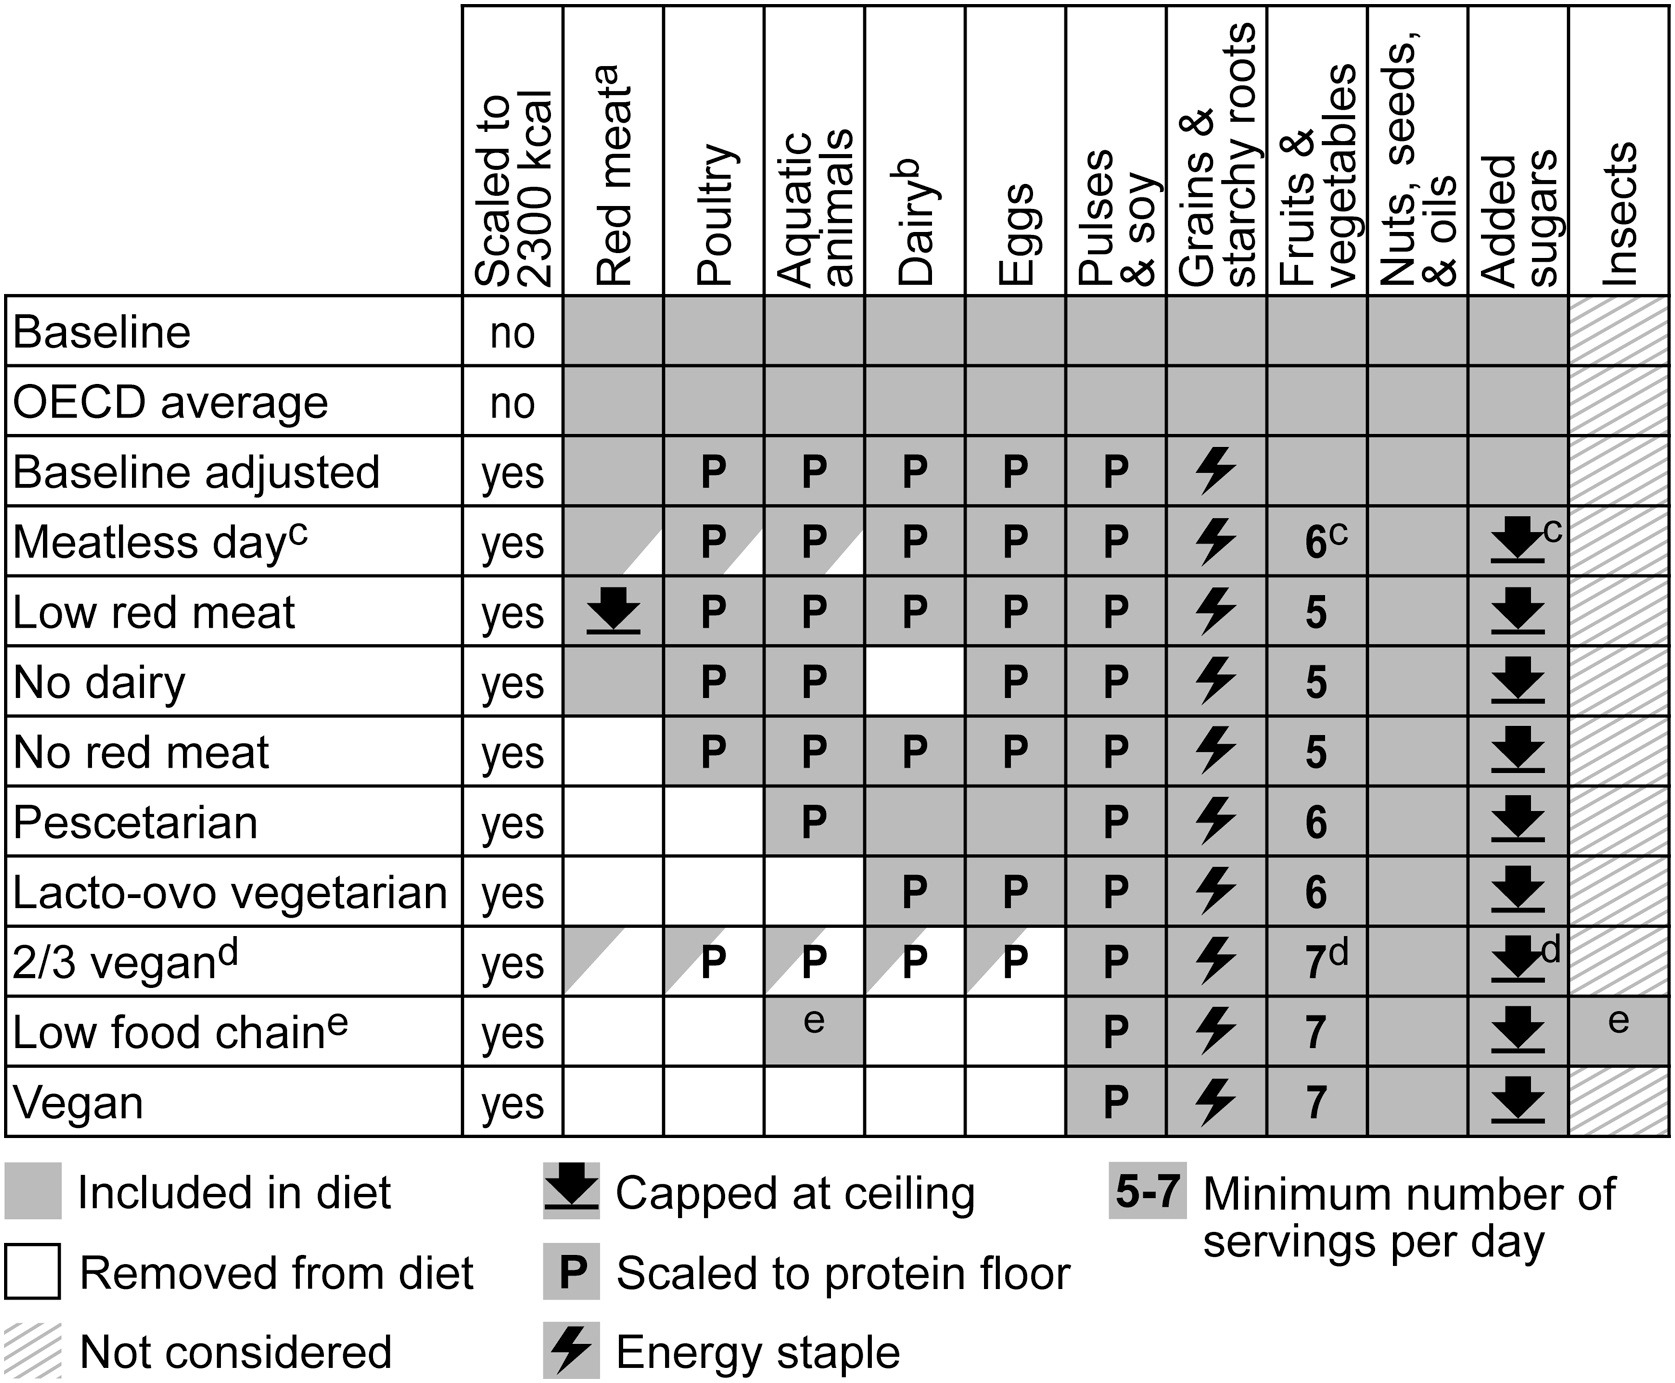 Summary of diets modelled